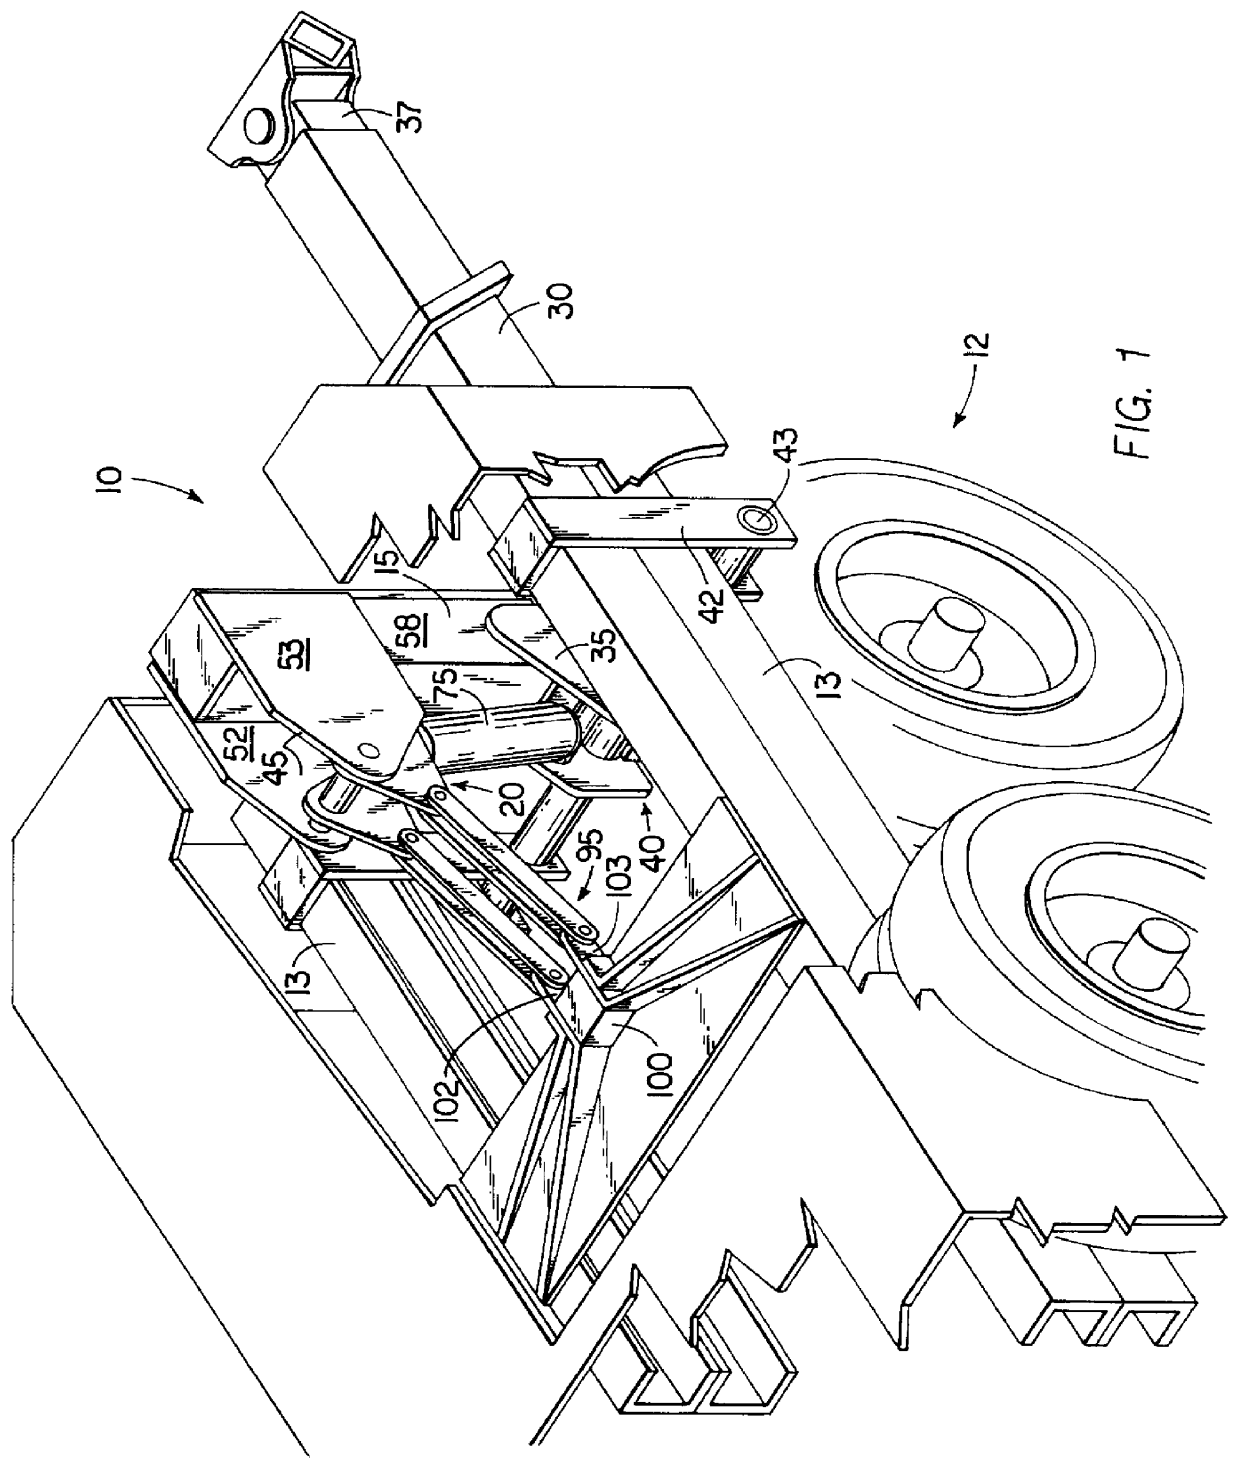 Vehicle lifting and towing method and apparatus